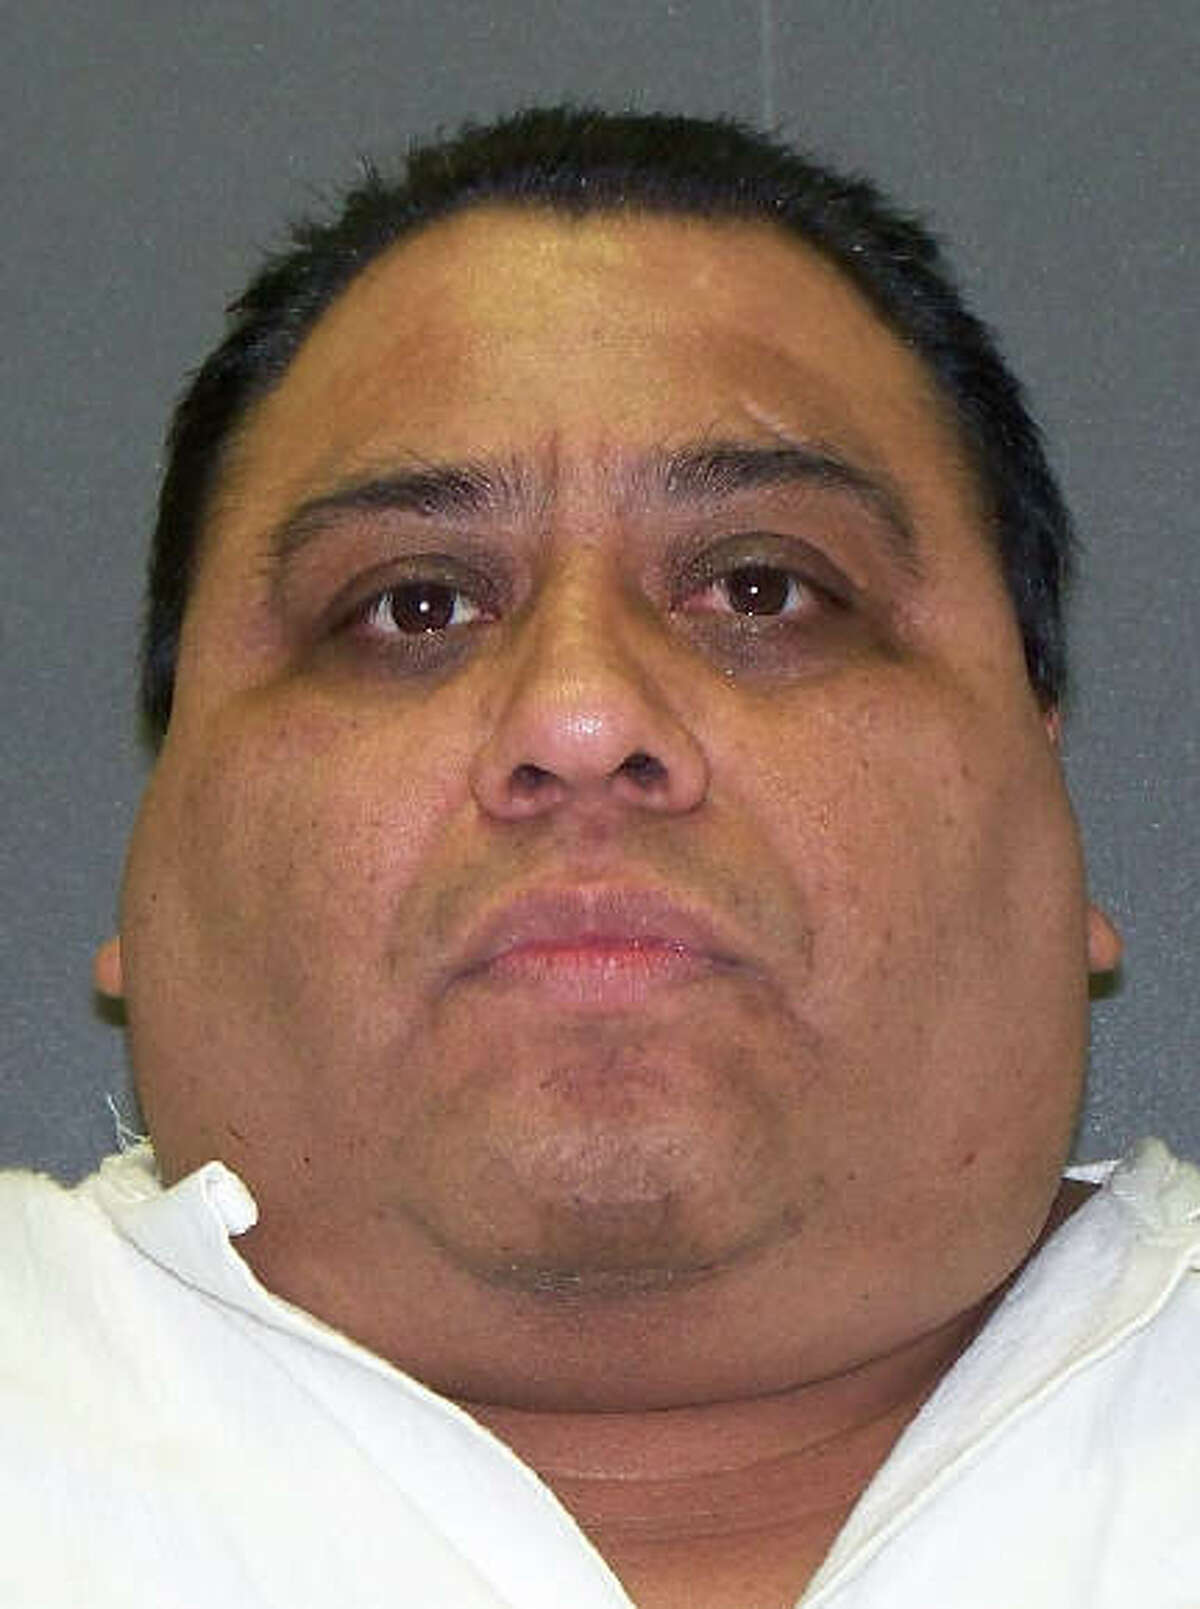 Ramiro Hernandez-Llanas is shown in this image provided by the Texas Department of Criminal Justice. A judge ordered Texas prison officials Thursday, March 27, 2014, to disclose the supplier of a new batch of lethal injection drugs to attorneys for convicted killers Hernandez-Llanas and Tommy Lynn Sells, both set to be executed in April, 2014, but she stopped short of revealing the identity of the manufacturer to the public. (AP Photo/Texas Department of Criminal Justice)